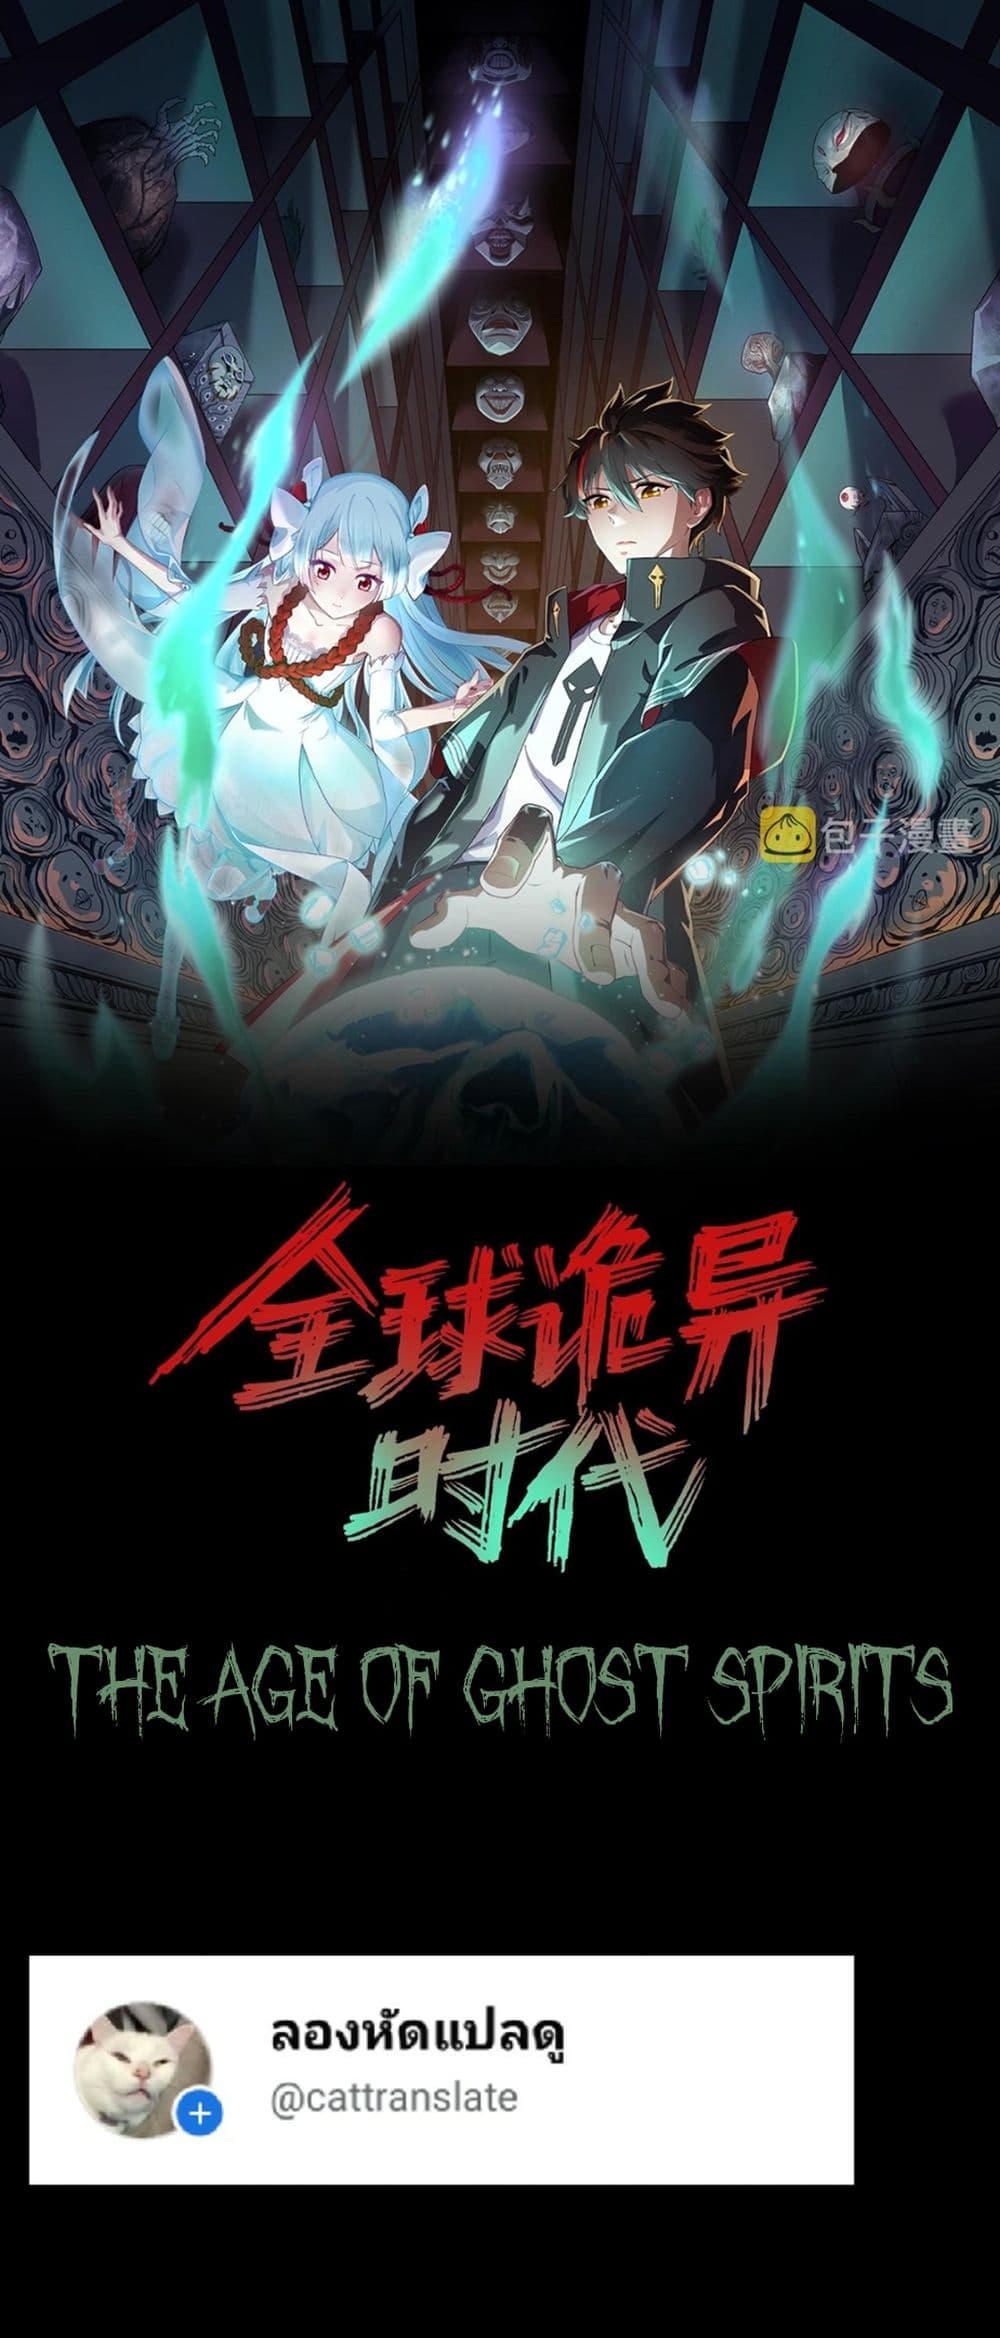 The Age of Ghost Spirits à¸à¸­à¸à¸à¸µà¹ 13 (1)